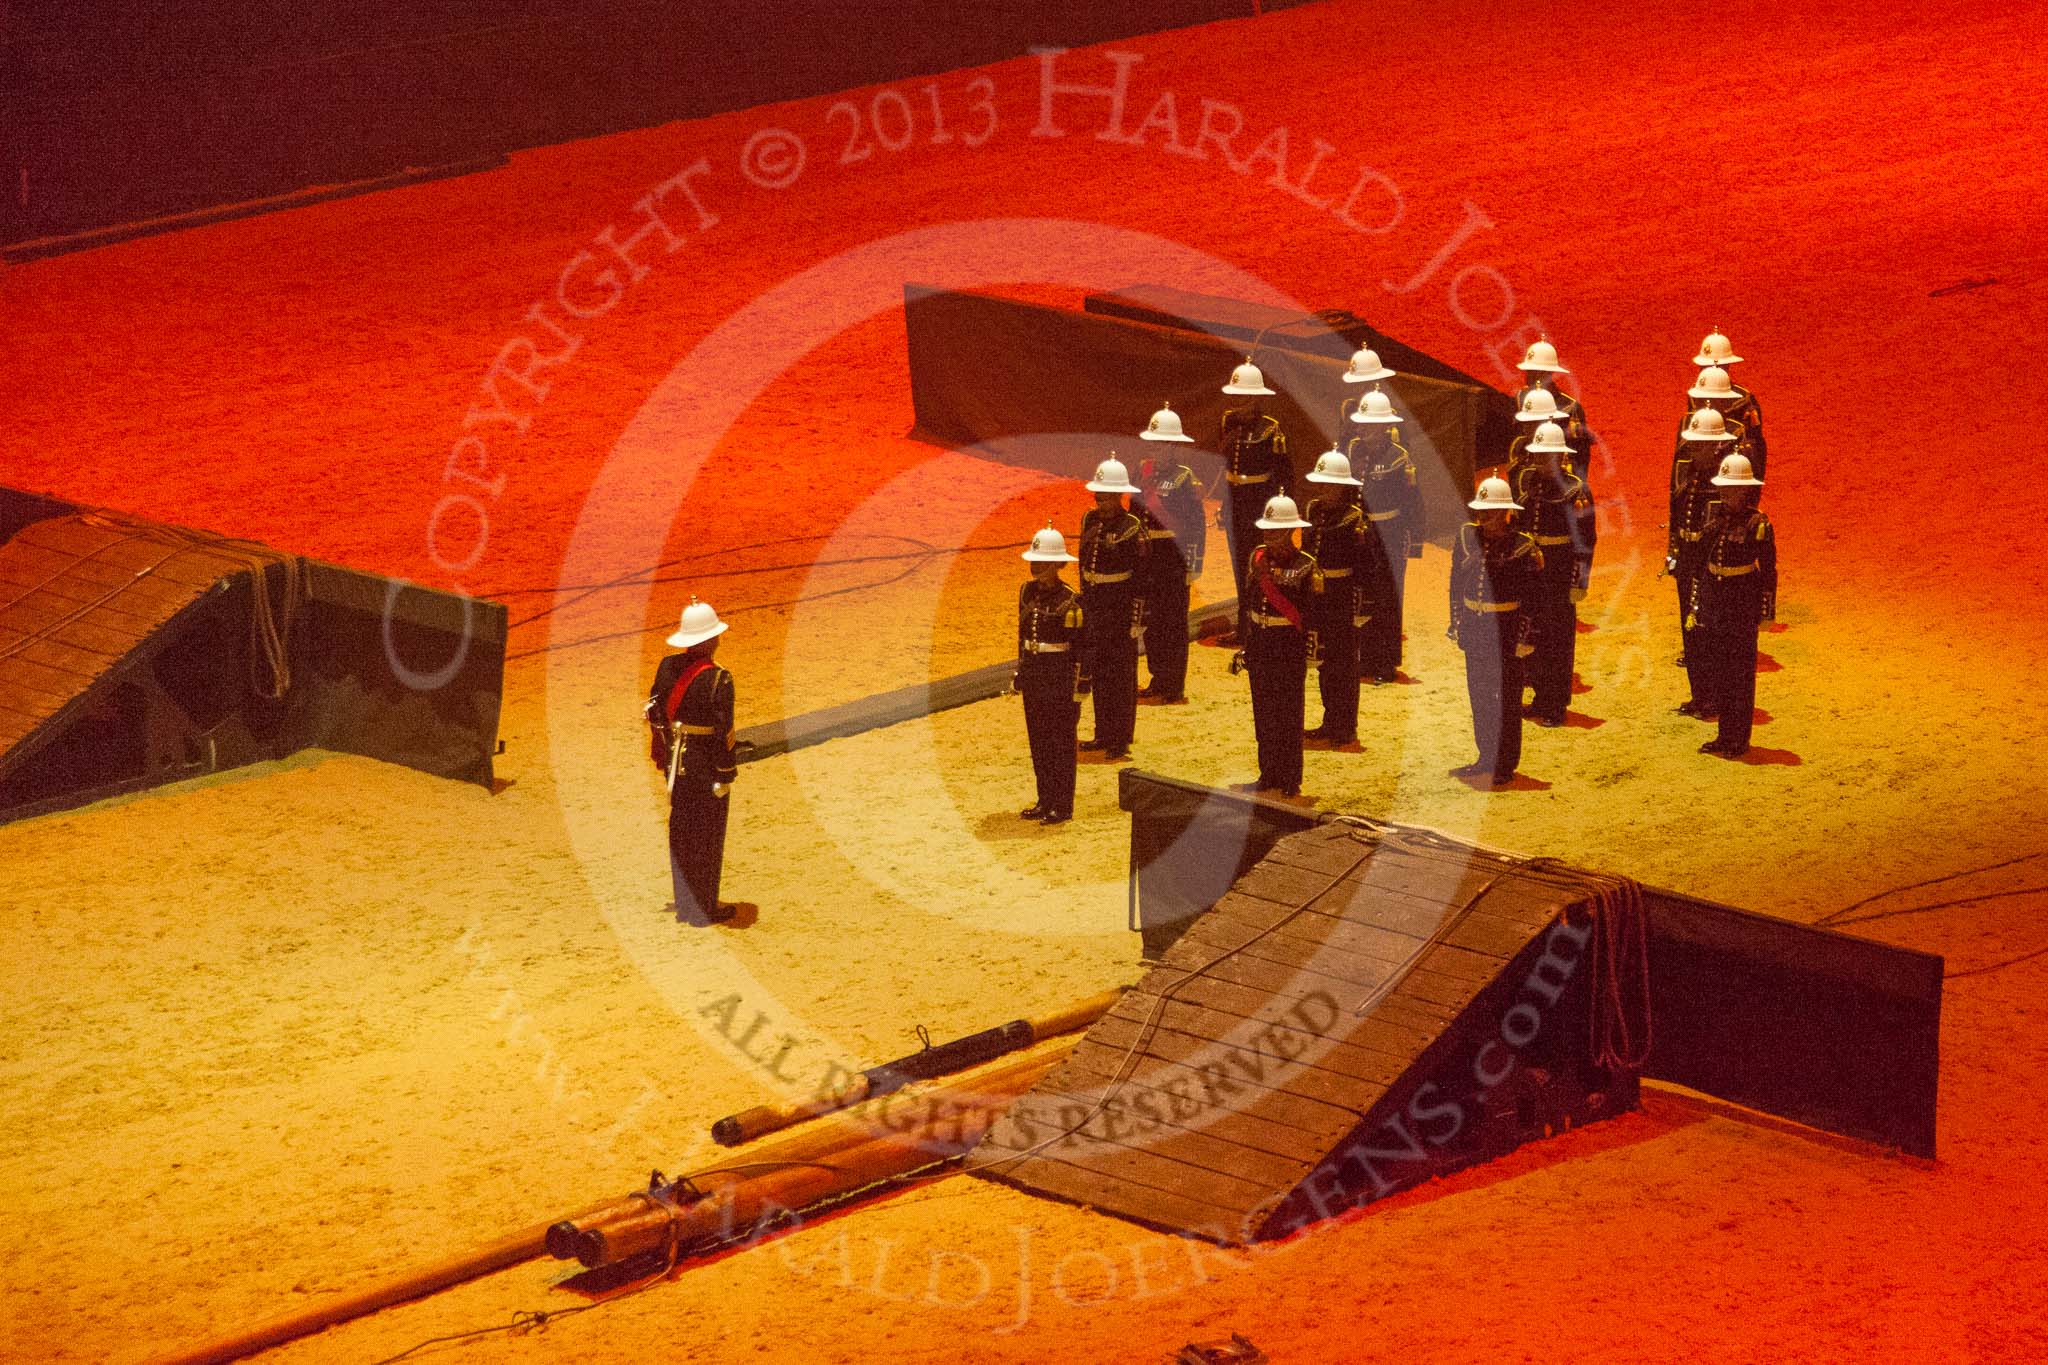 British Military Tournament 2013.
Earls Court,
London SW5,

United Kingdom,
on 06 December 2013 at 16:00, image #256